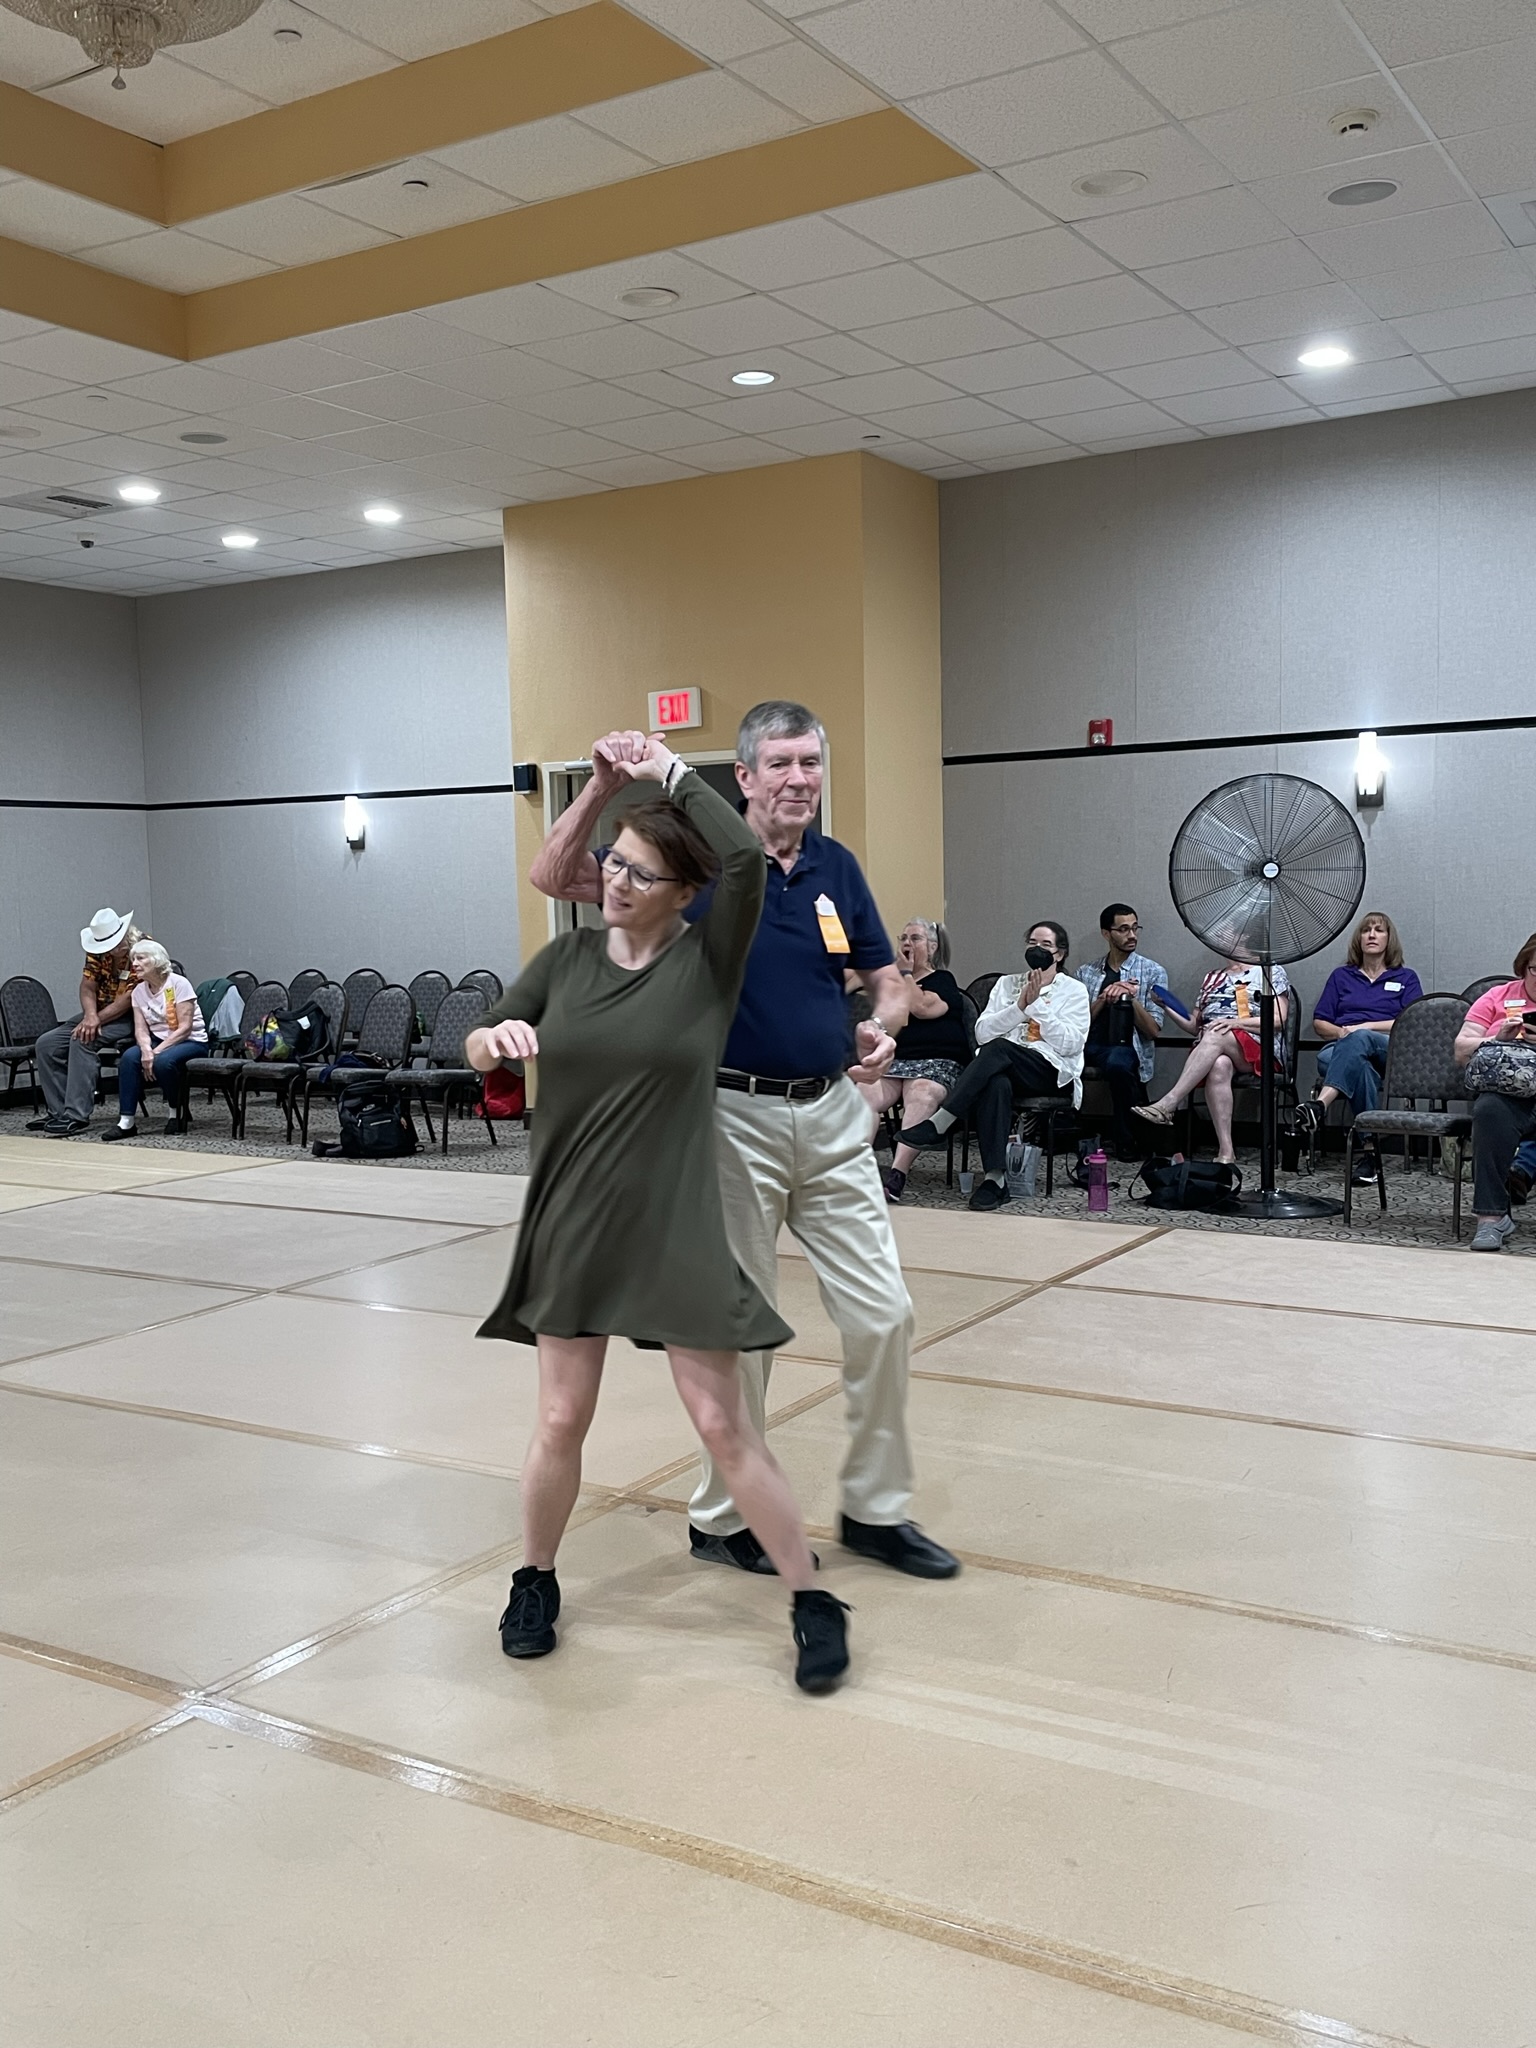 Photo of Jim and Angie dancing rounds